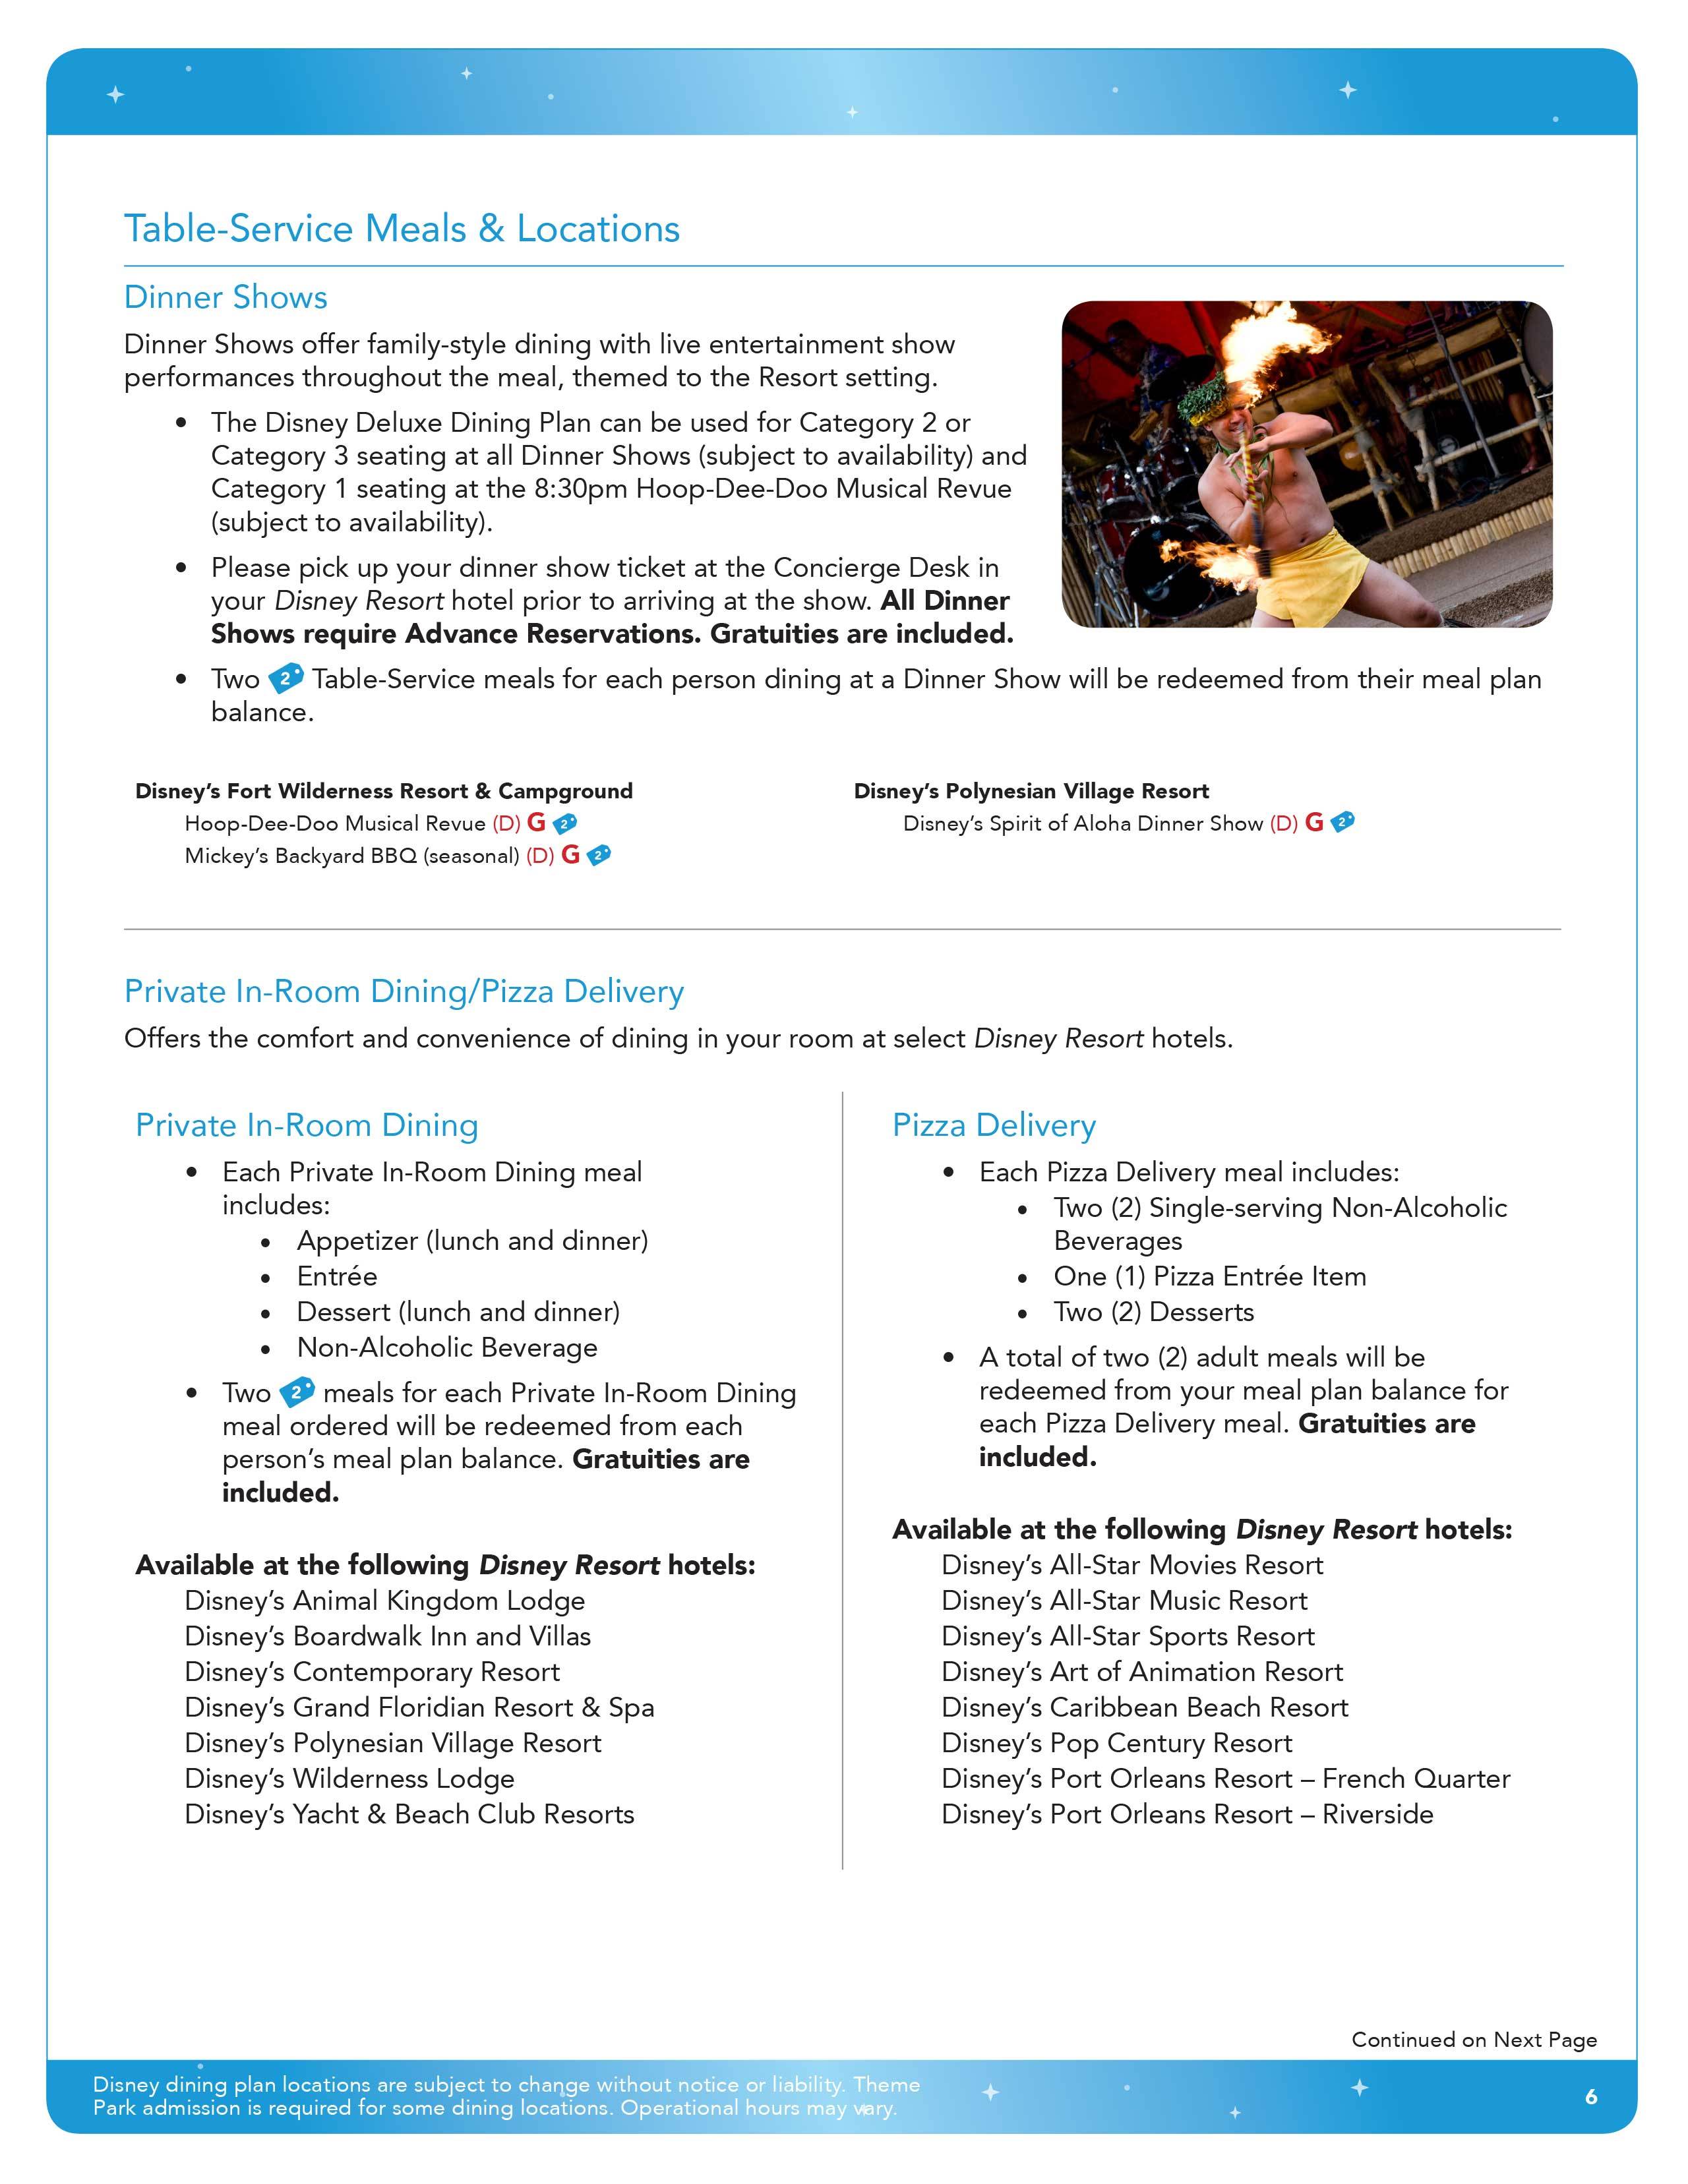 2016 Disney Deluxe Dining Plan brochure - Page 6